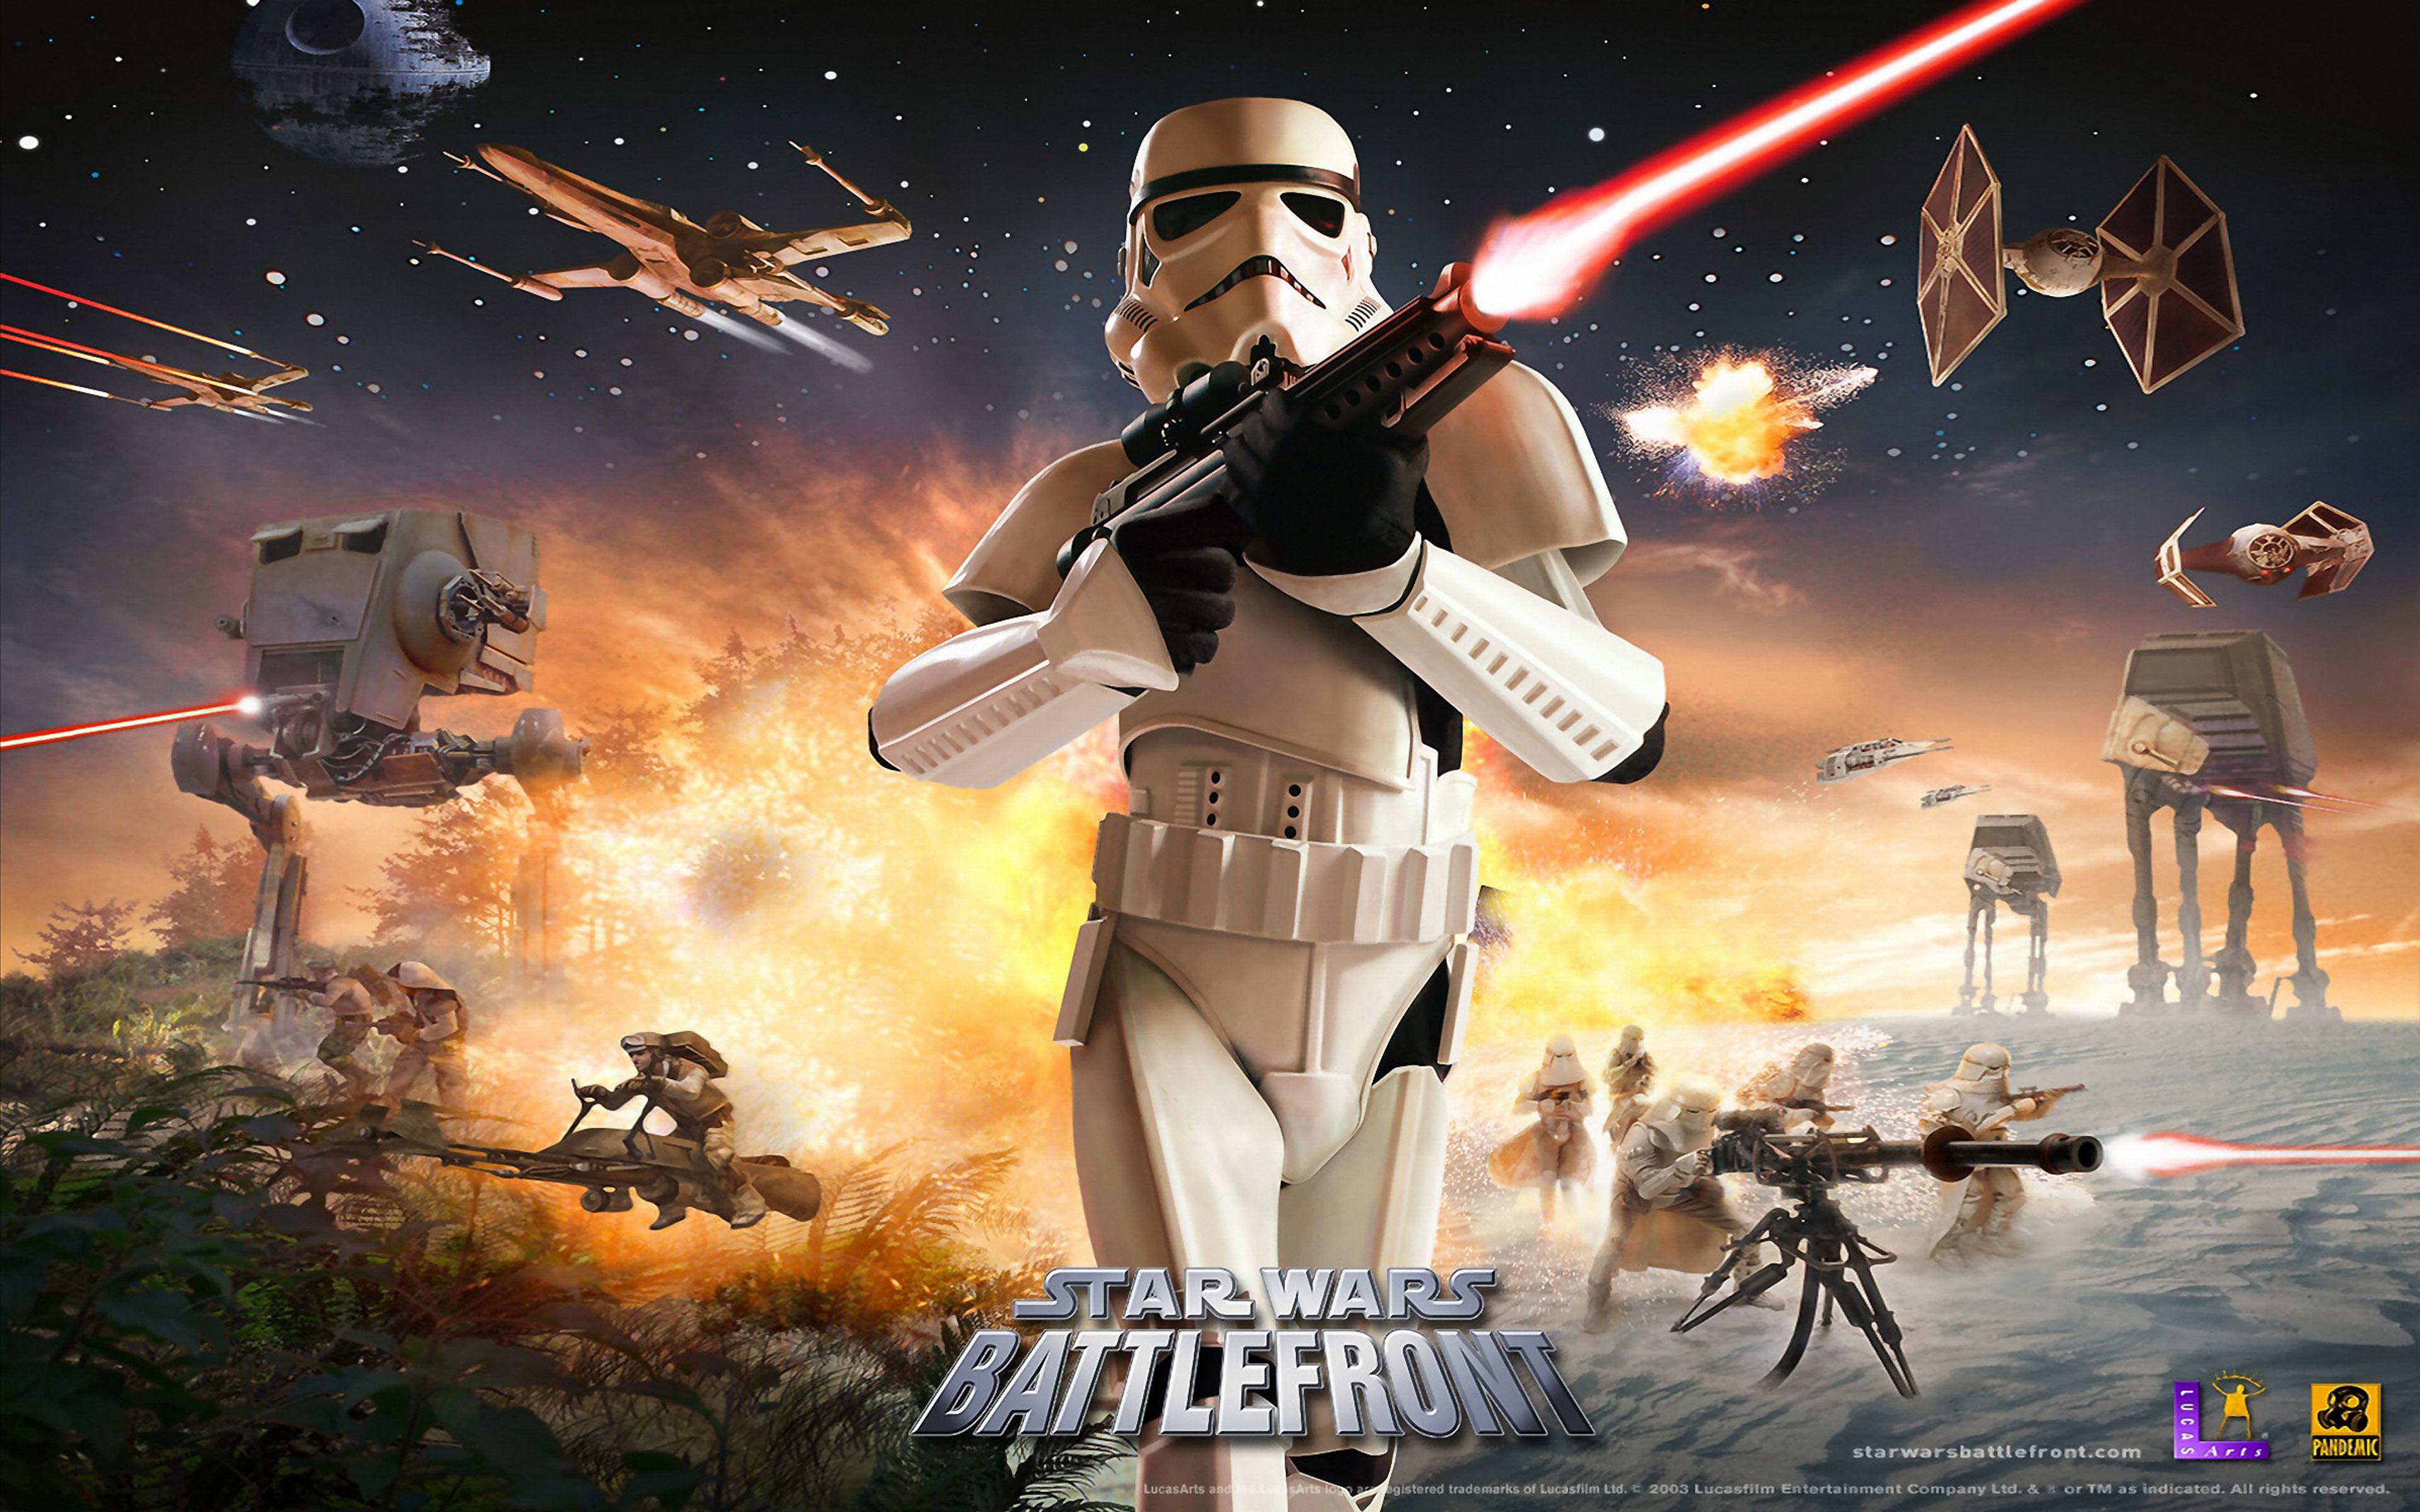 Battlefront classic collection switch. Star Wars Battlefront 1. Star Wars Battlefront 2 2004. Star Wars Battlefront 2004. Star Wars Battlefront 2003.